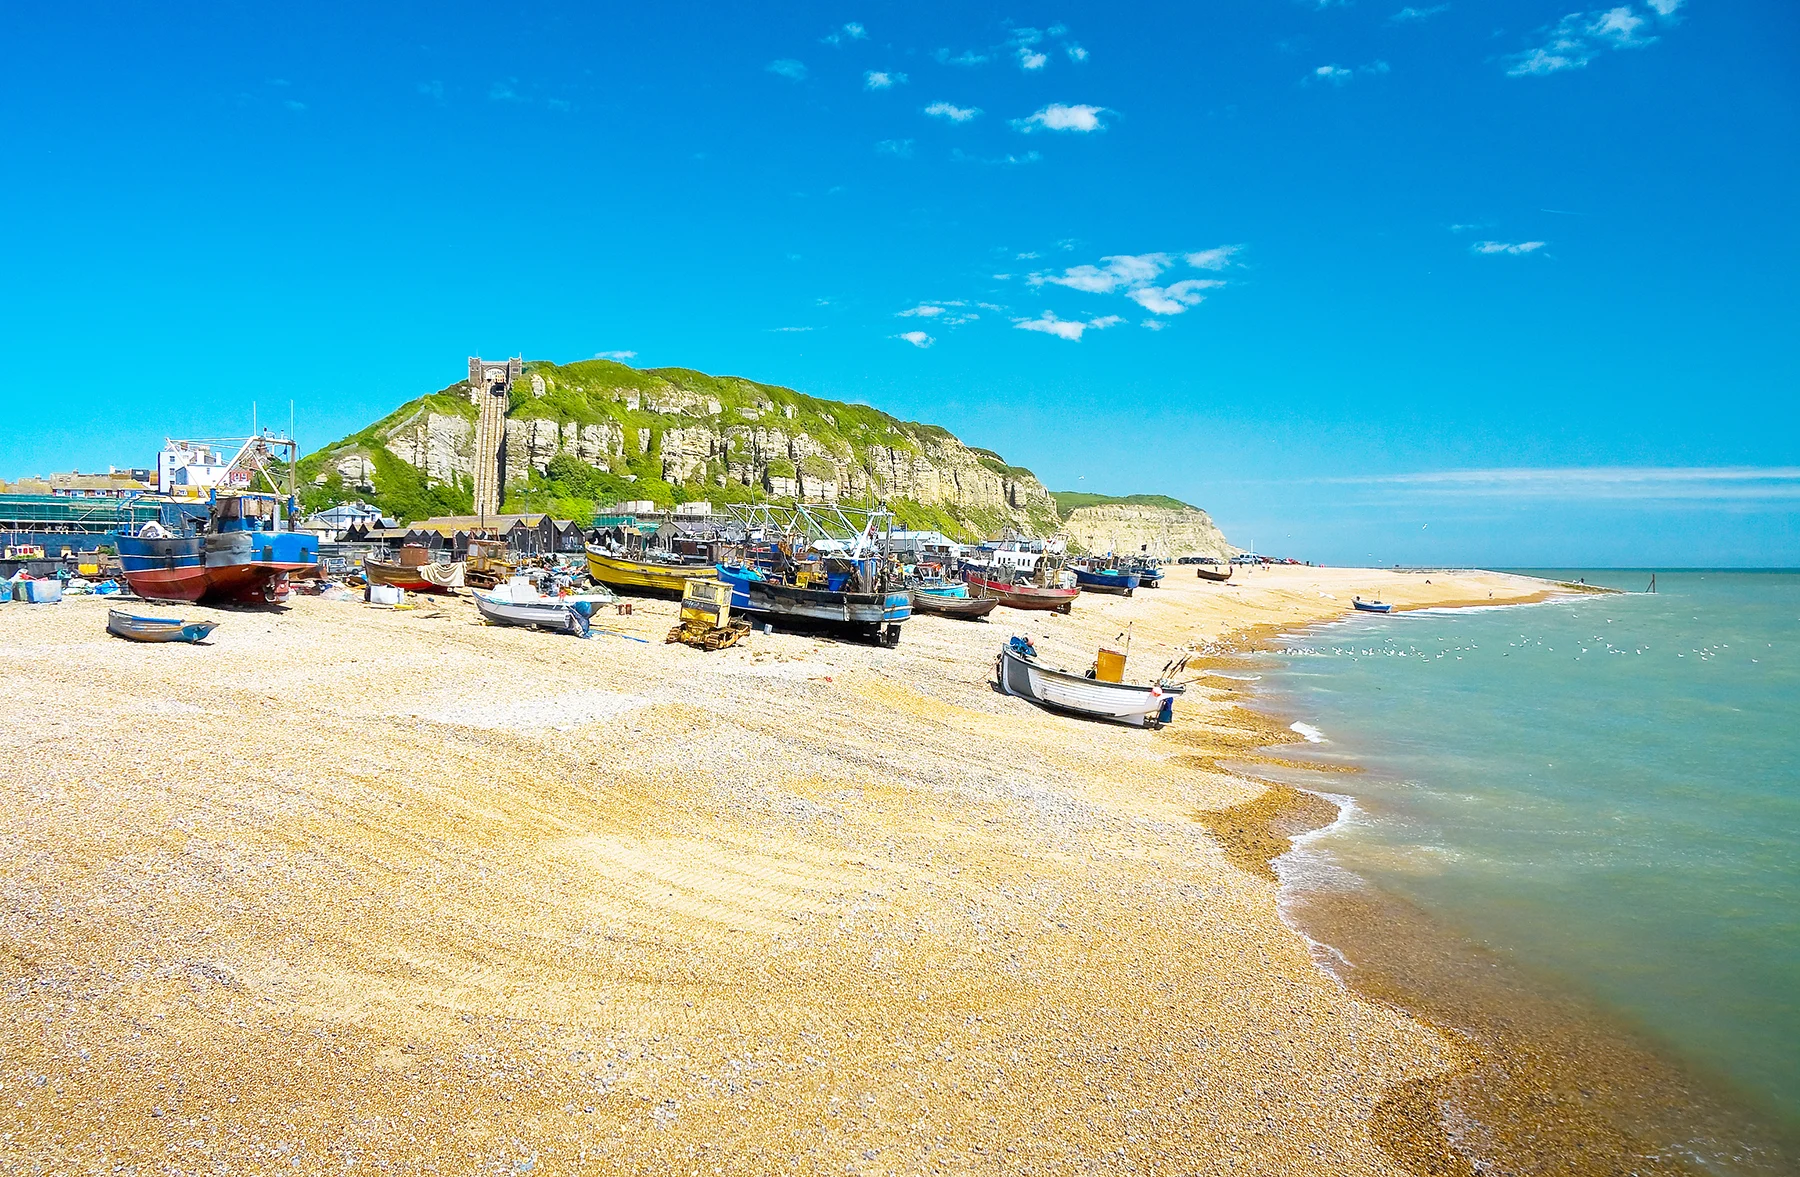 Looking along a shingle beach with fishing boats along the shore, a clifftop with a cliff railway is in the background, against a bright blue sky. 